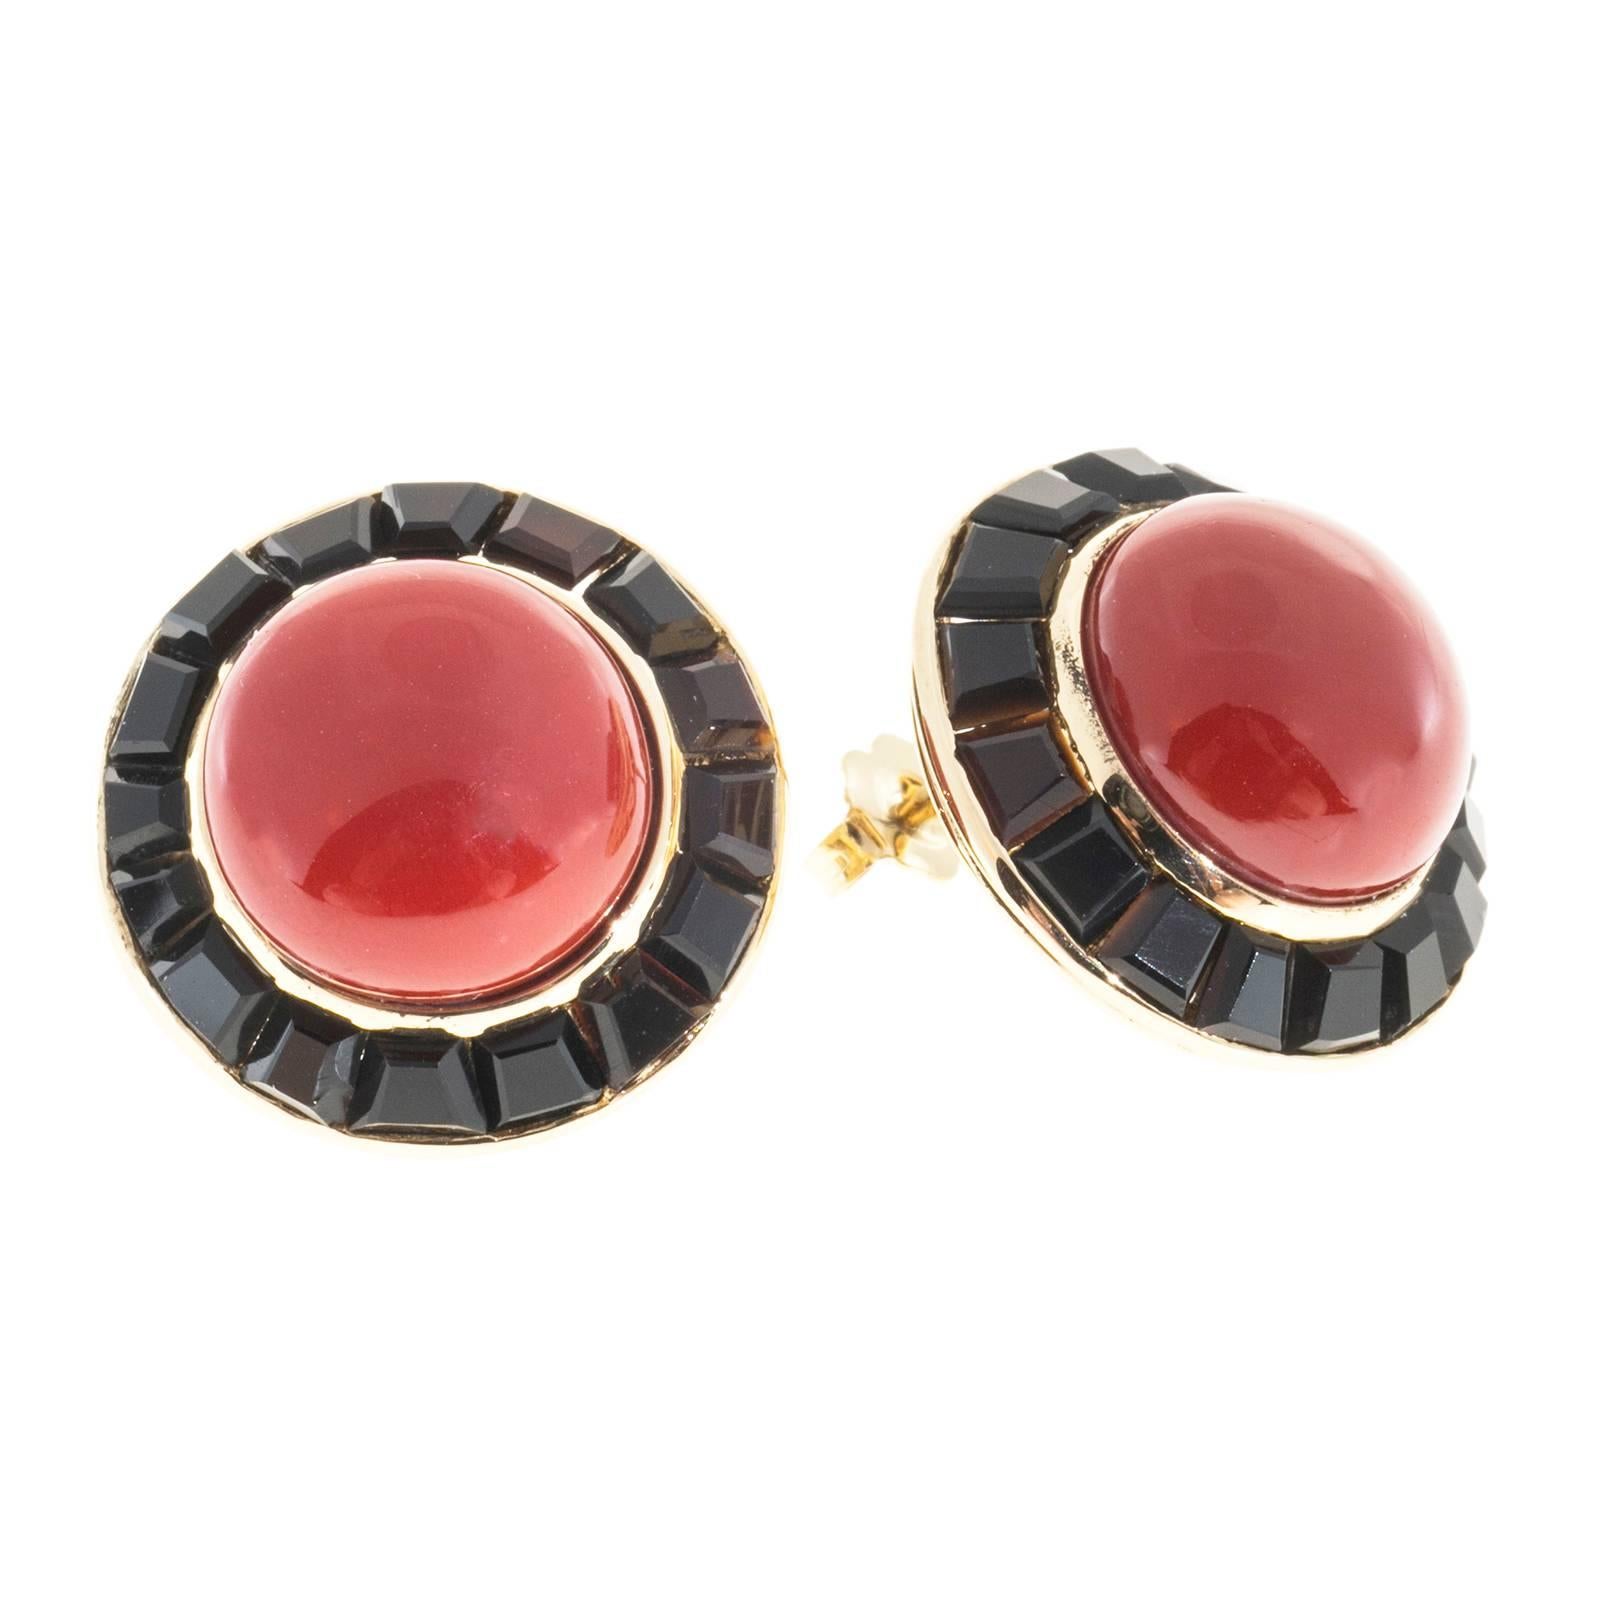 18k yellow gold gem quality red well-polished untreated Coral earrings circa 1950 to 1960 surrounded by custom trapezoid cut black Onyx.

2 round orangey red Coral, 13.41 x 13.43mm, natural color, no heat and no enhancements, GIA certificate